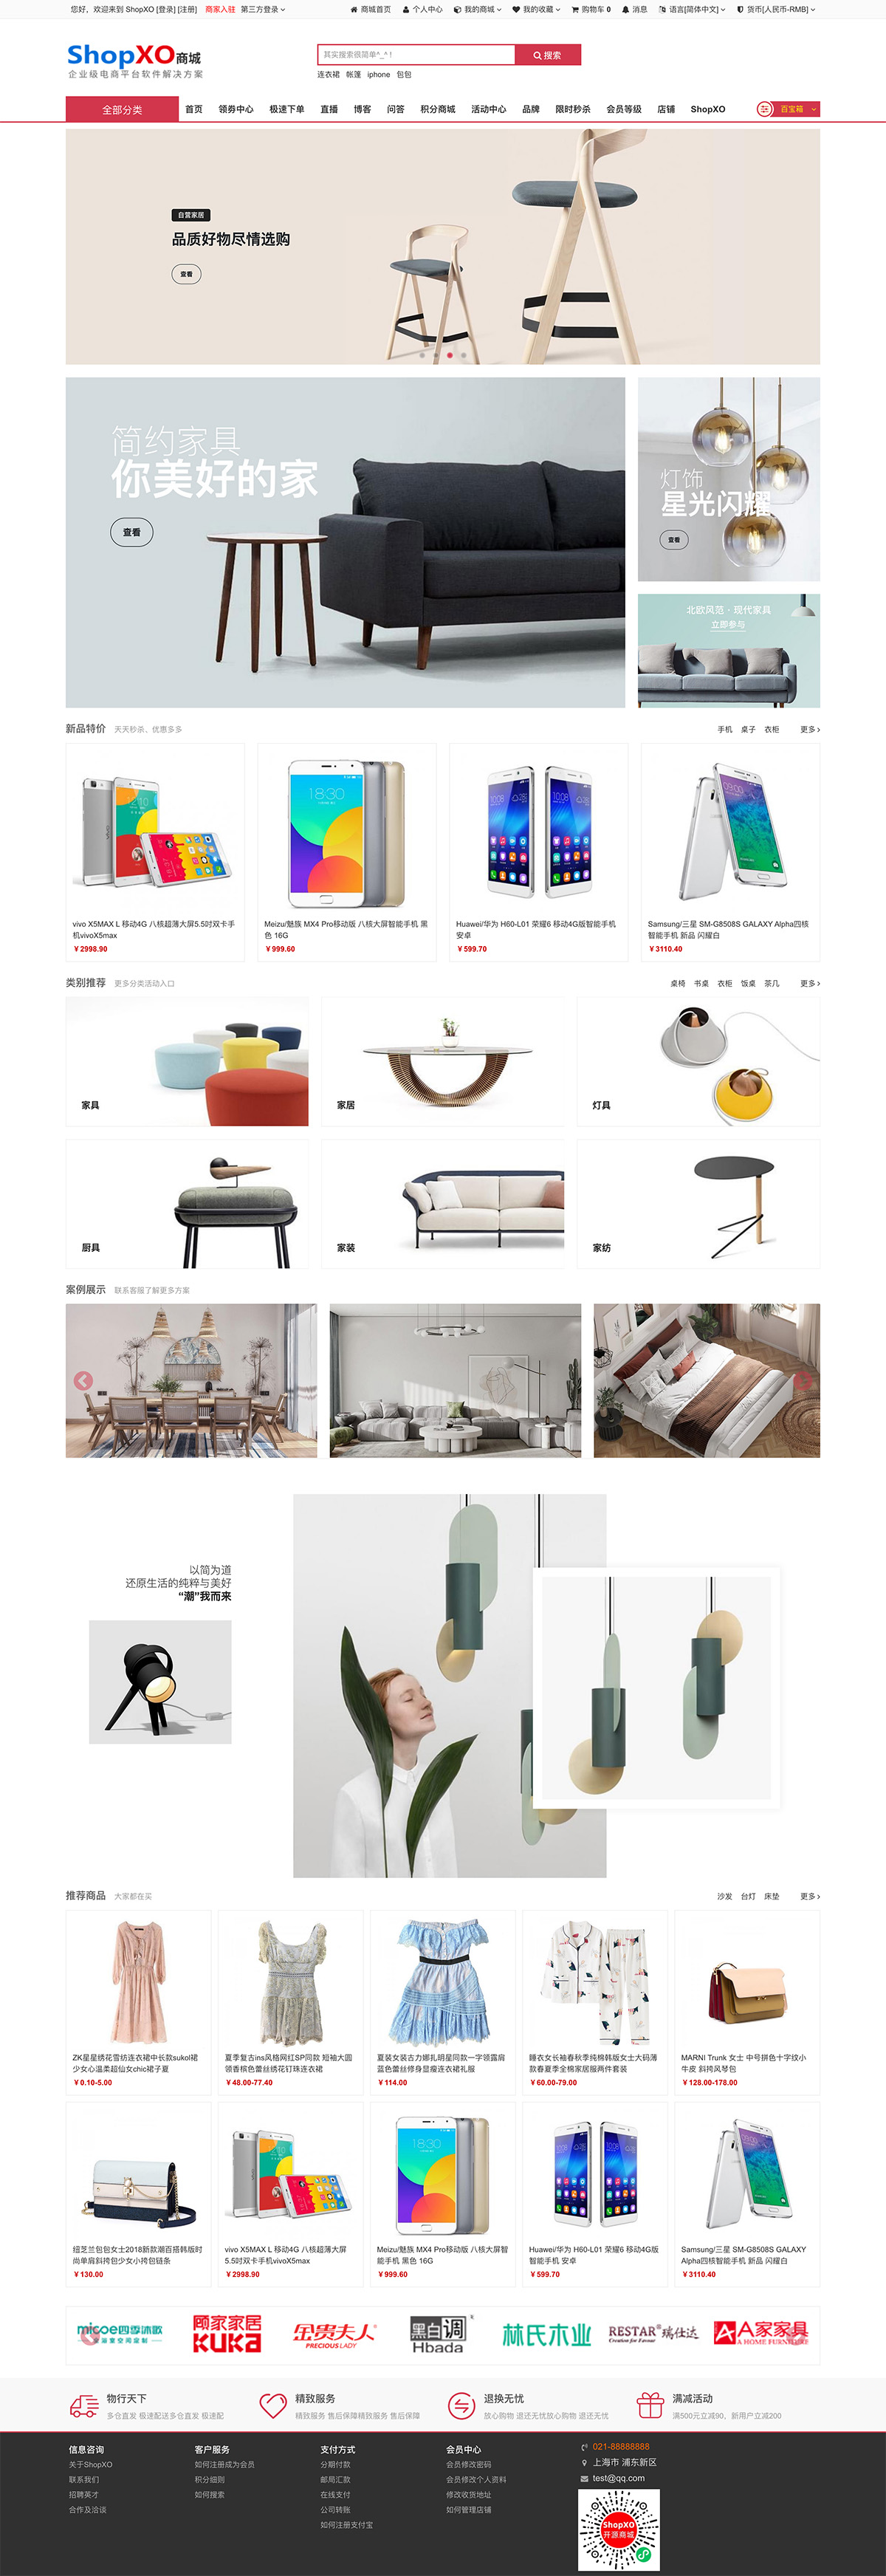 Single page template of home decoration platform-Effect Picture.jpg